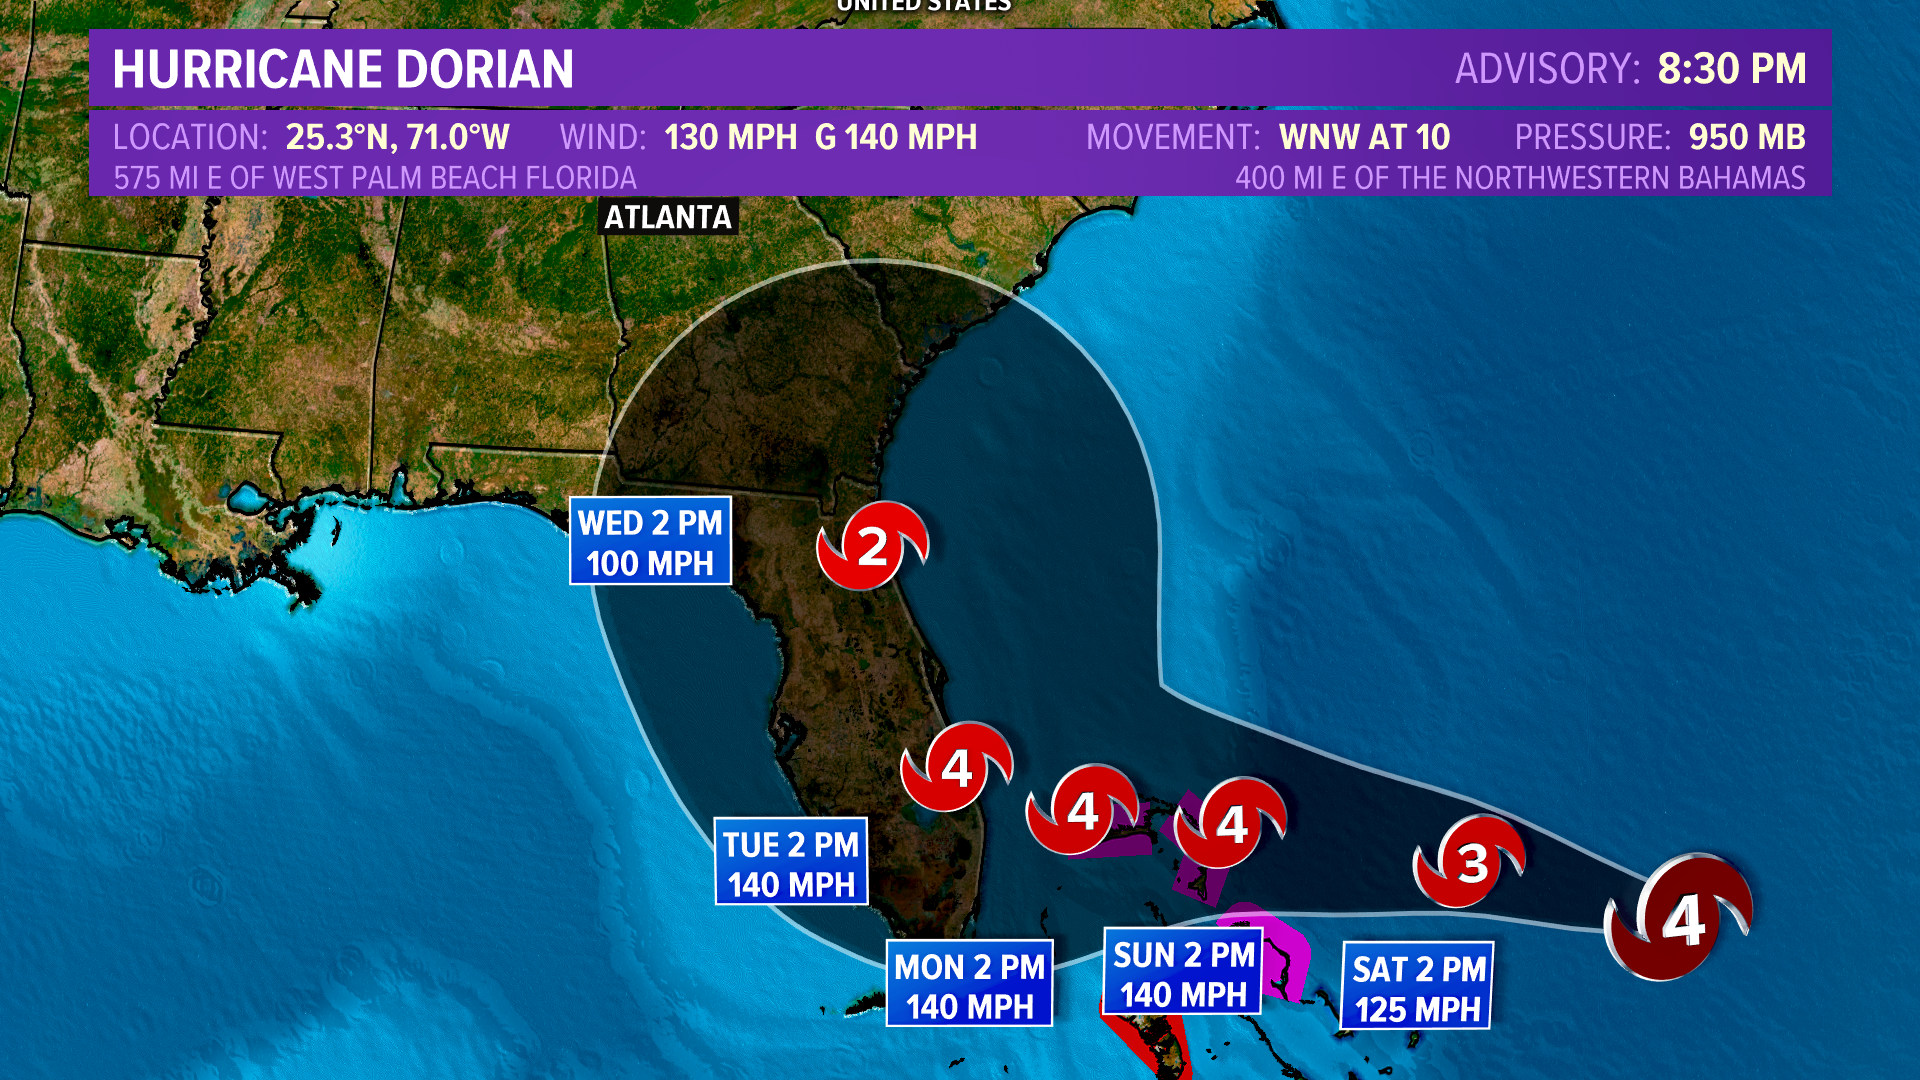 What's the latest with Hurricane Dorian? As of 8:30 p.m. Hurricane Dorian is an "extremely dangerous" Category 4 Hurricane. Parts of the northwest Bahama are under warnings and watches as the storm continues it's slow track towards Florida.